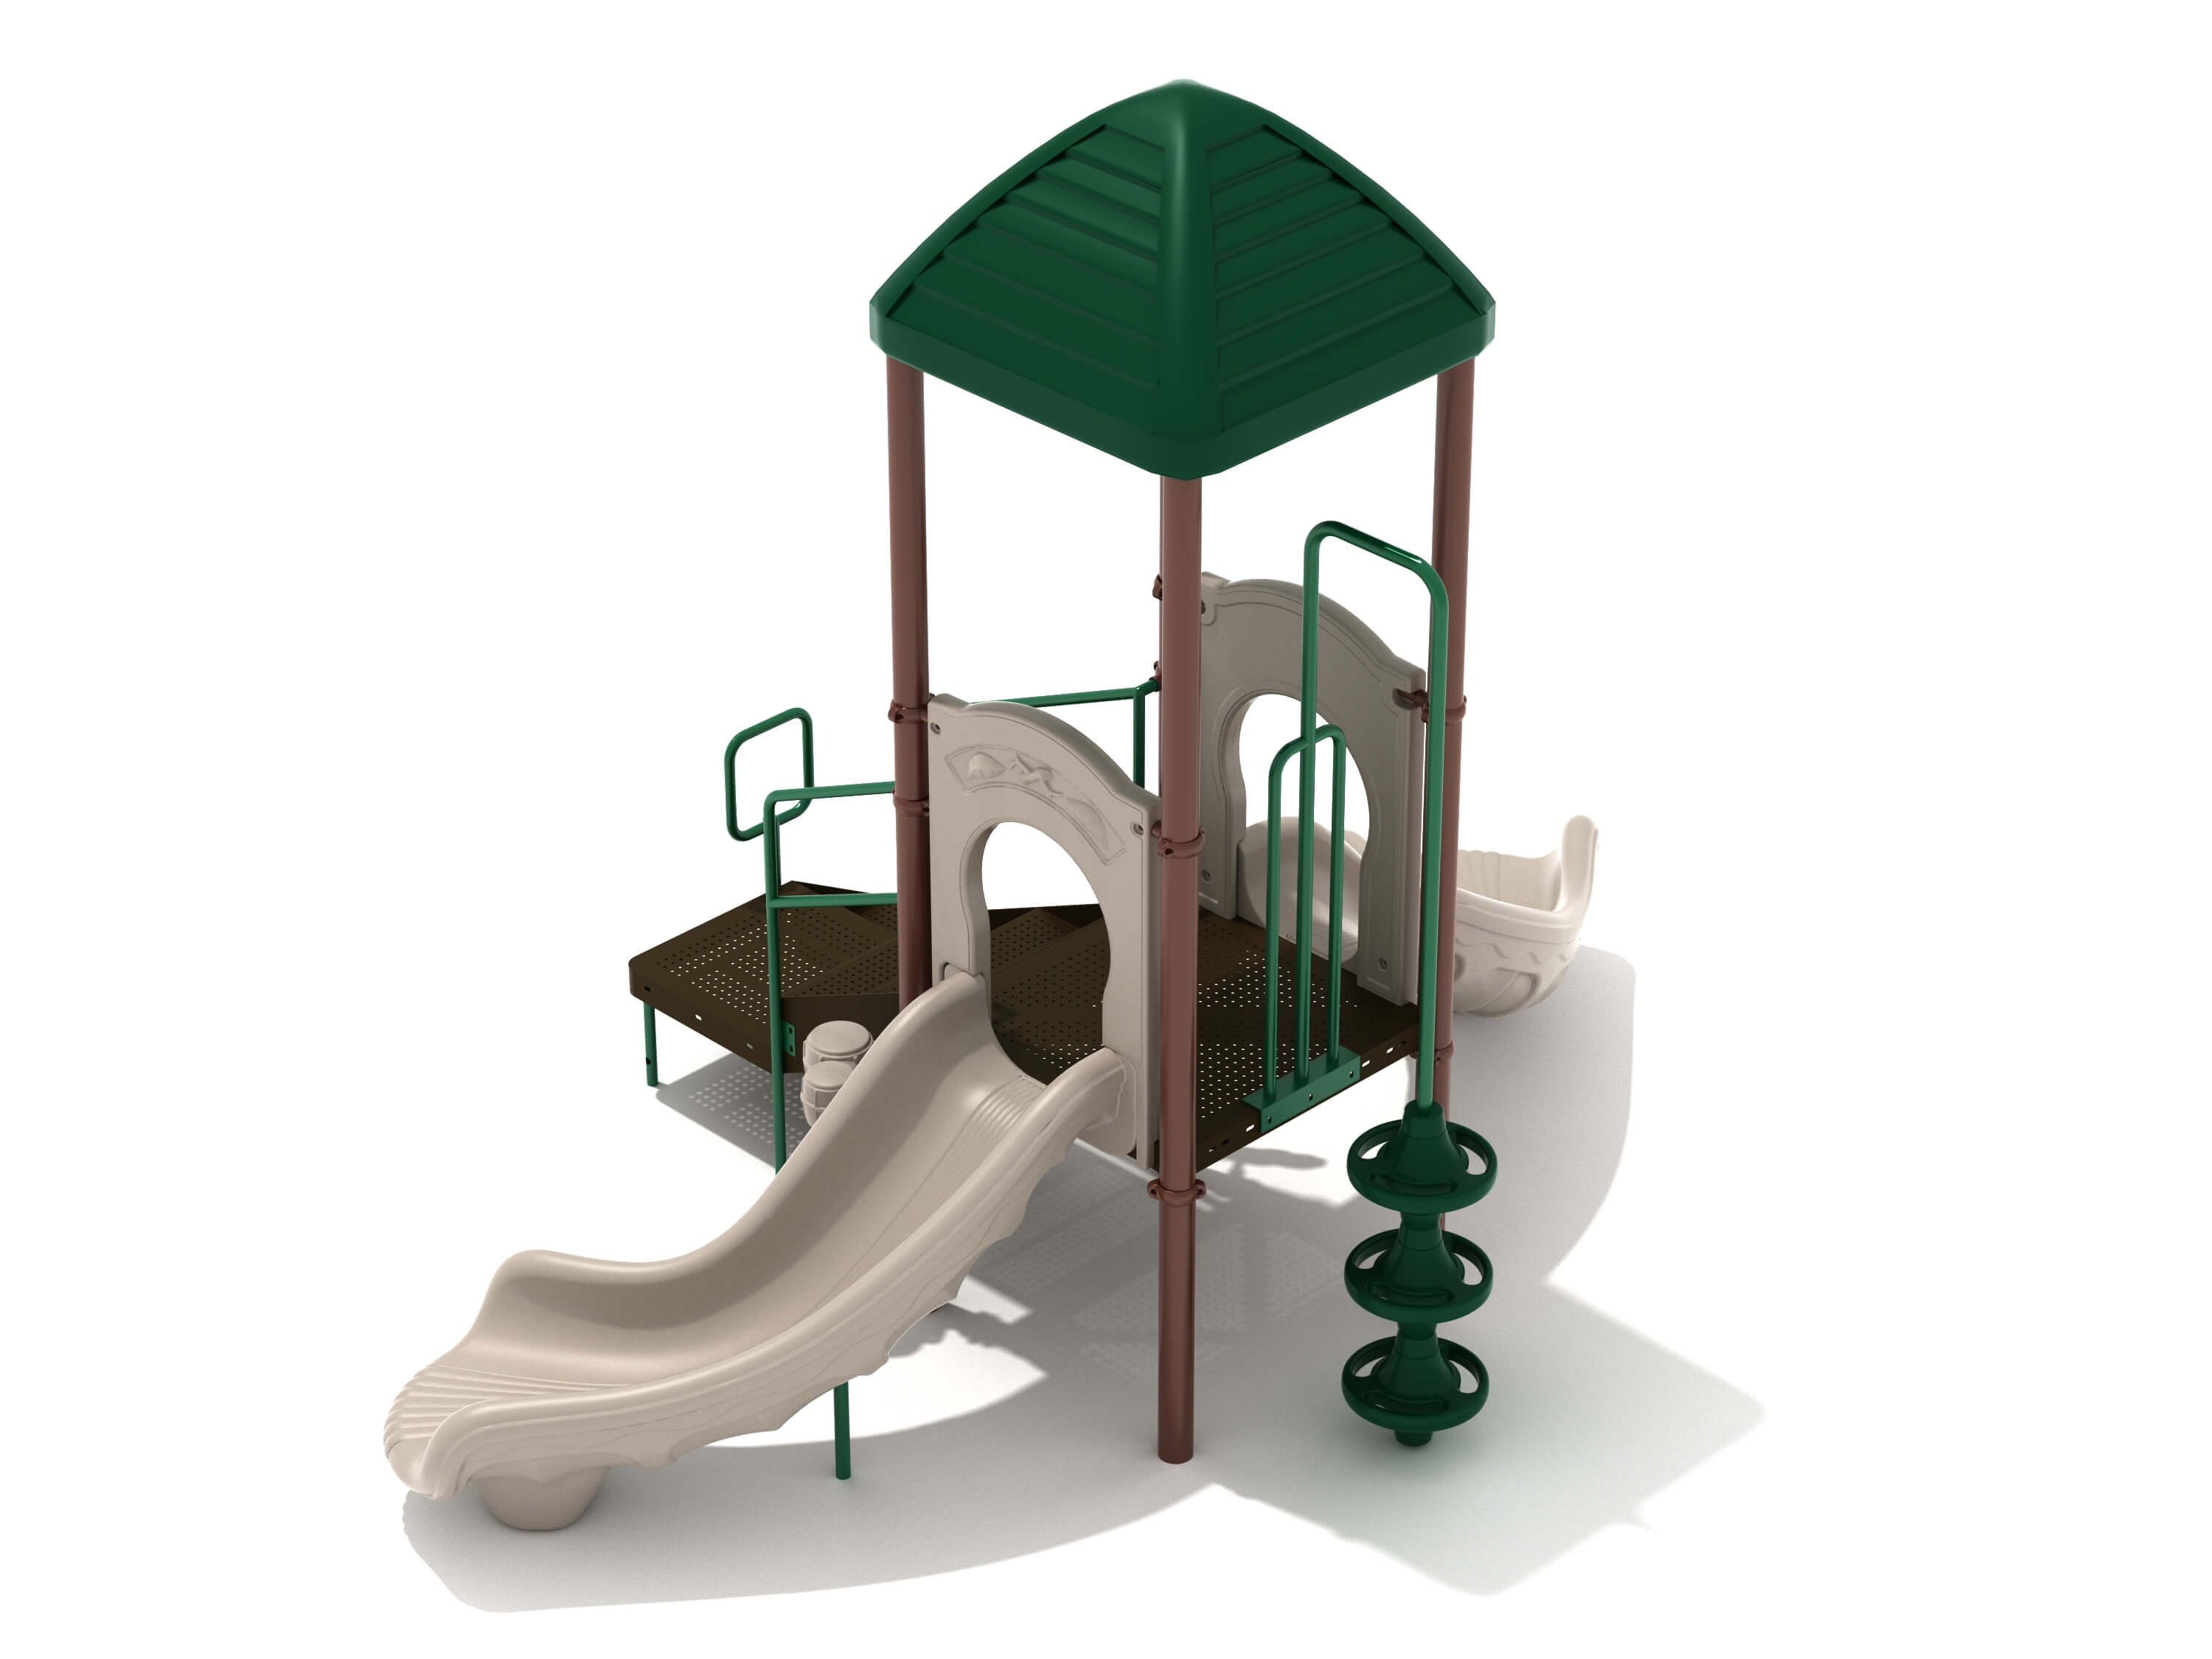 Commercial Playground Equipment – Madison (PGE-PKP002)